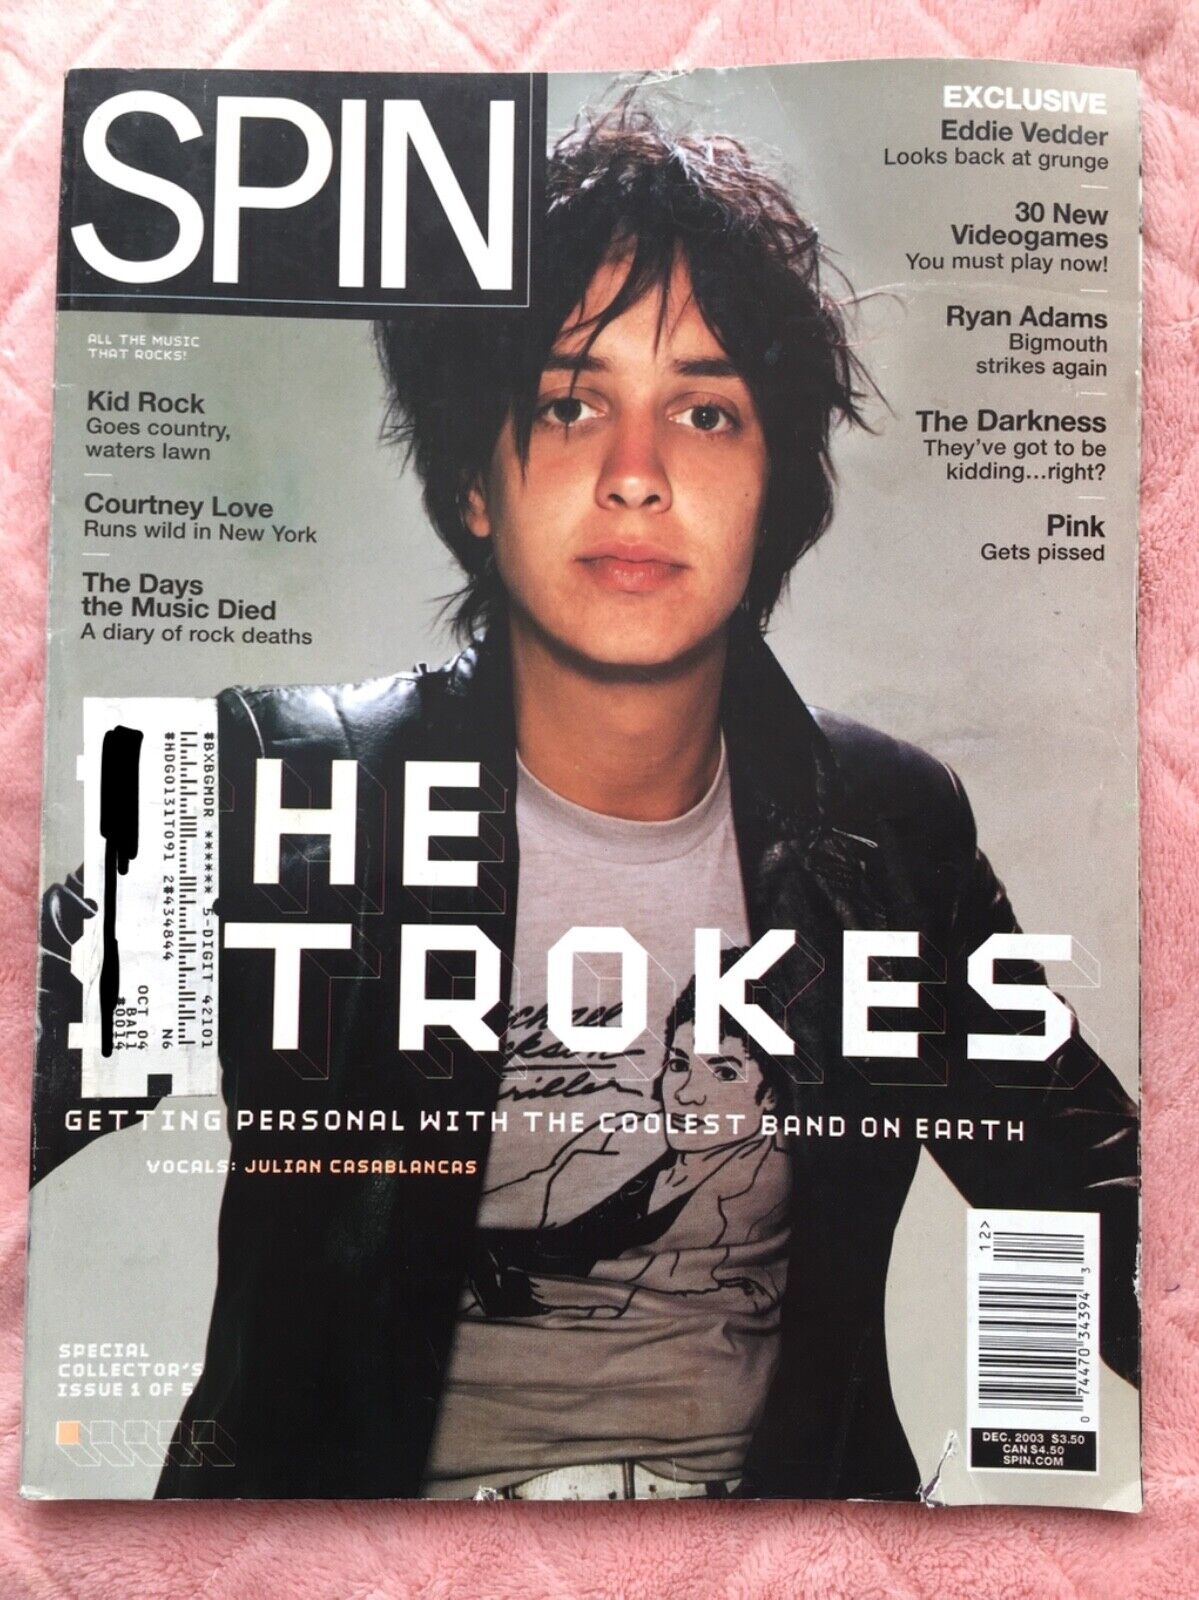 SPIN Magazine The Strokes Special Collectors Issue 1 of 5 December 2003